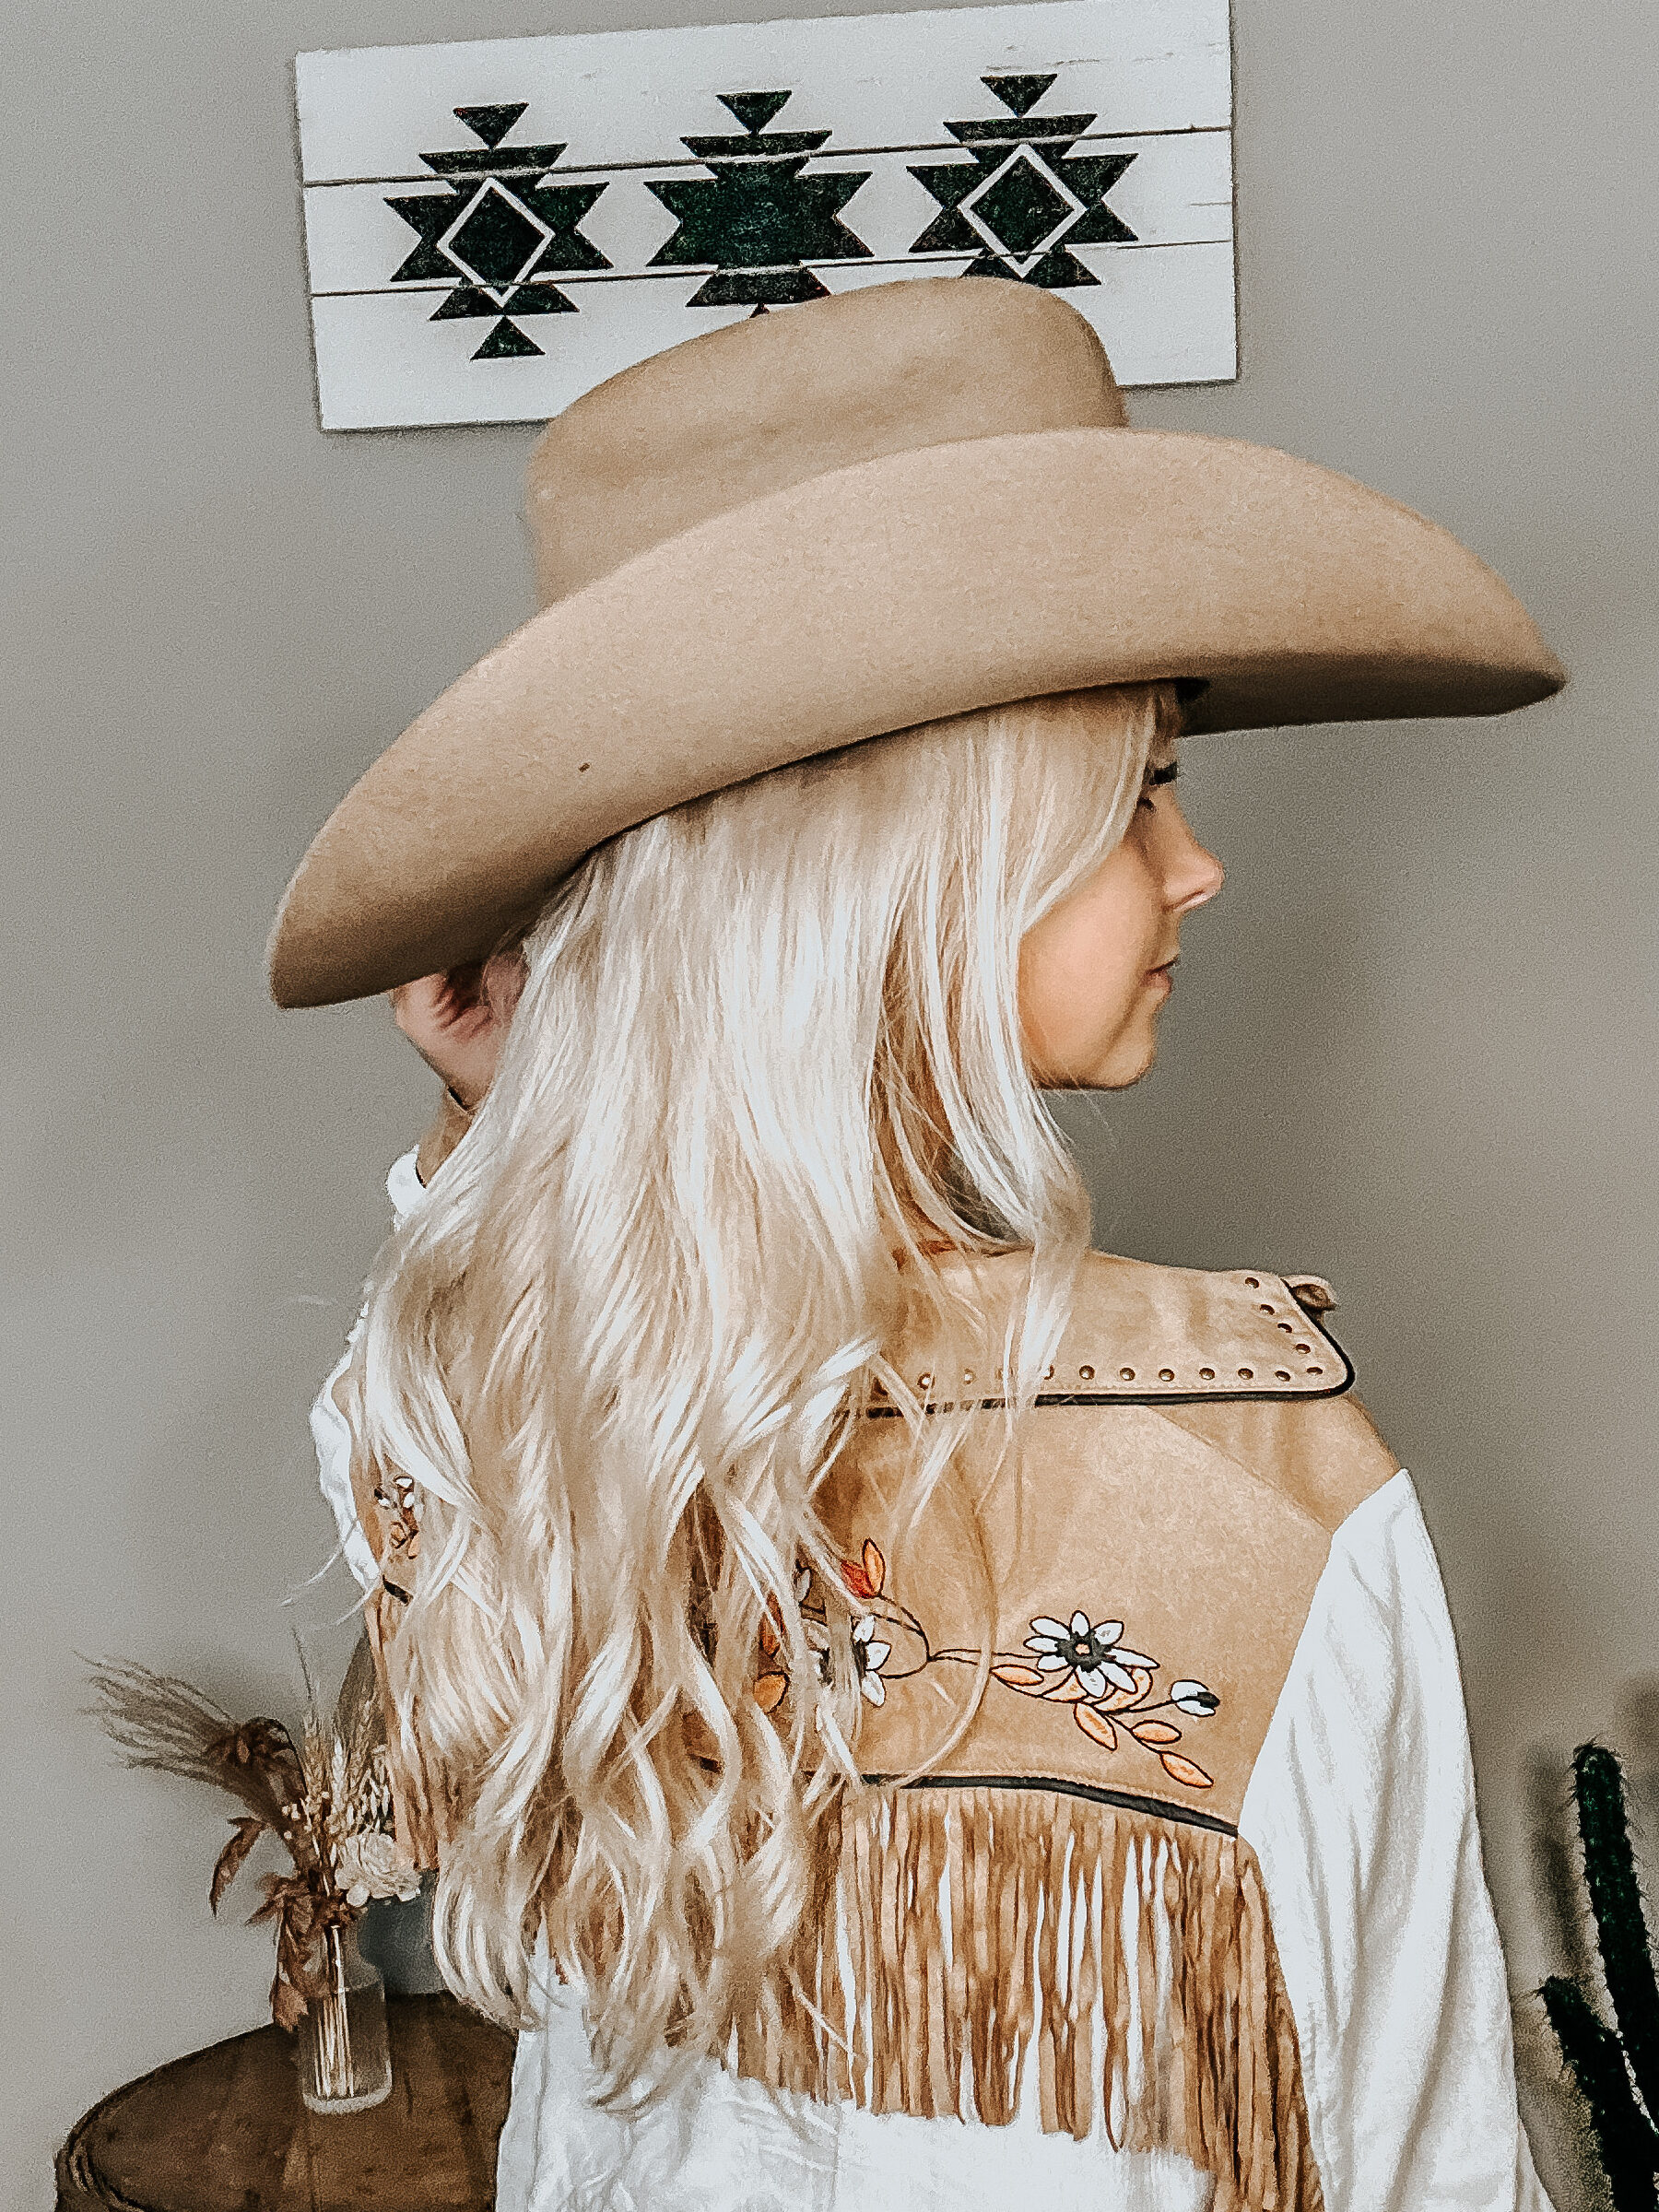 kiersten zile with a fringe western button-up back view of it to show the western fall dress style to give a visual of the look with a tan felt cowboy hat on